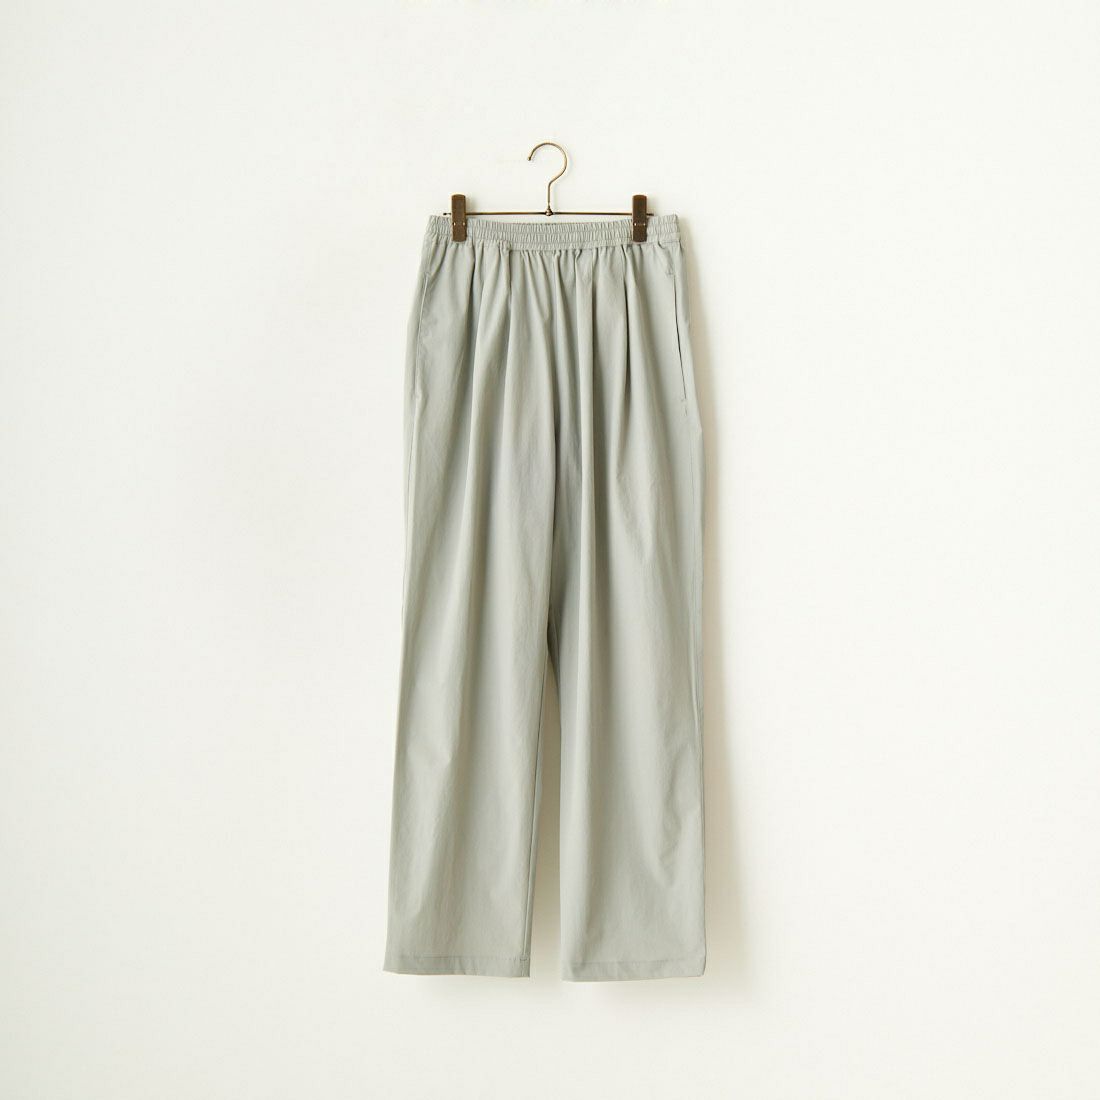 Jeans Factory Clothes [ジーンズファクトリークローズ] 7DAYSナイロンイージーパンツ [IN6-PT-4]GREY